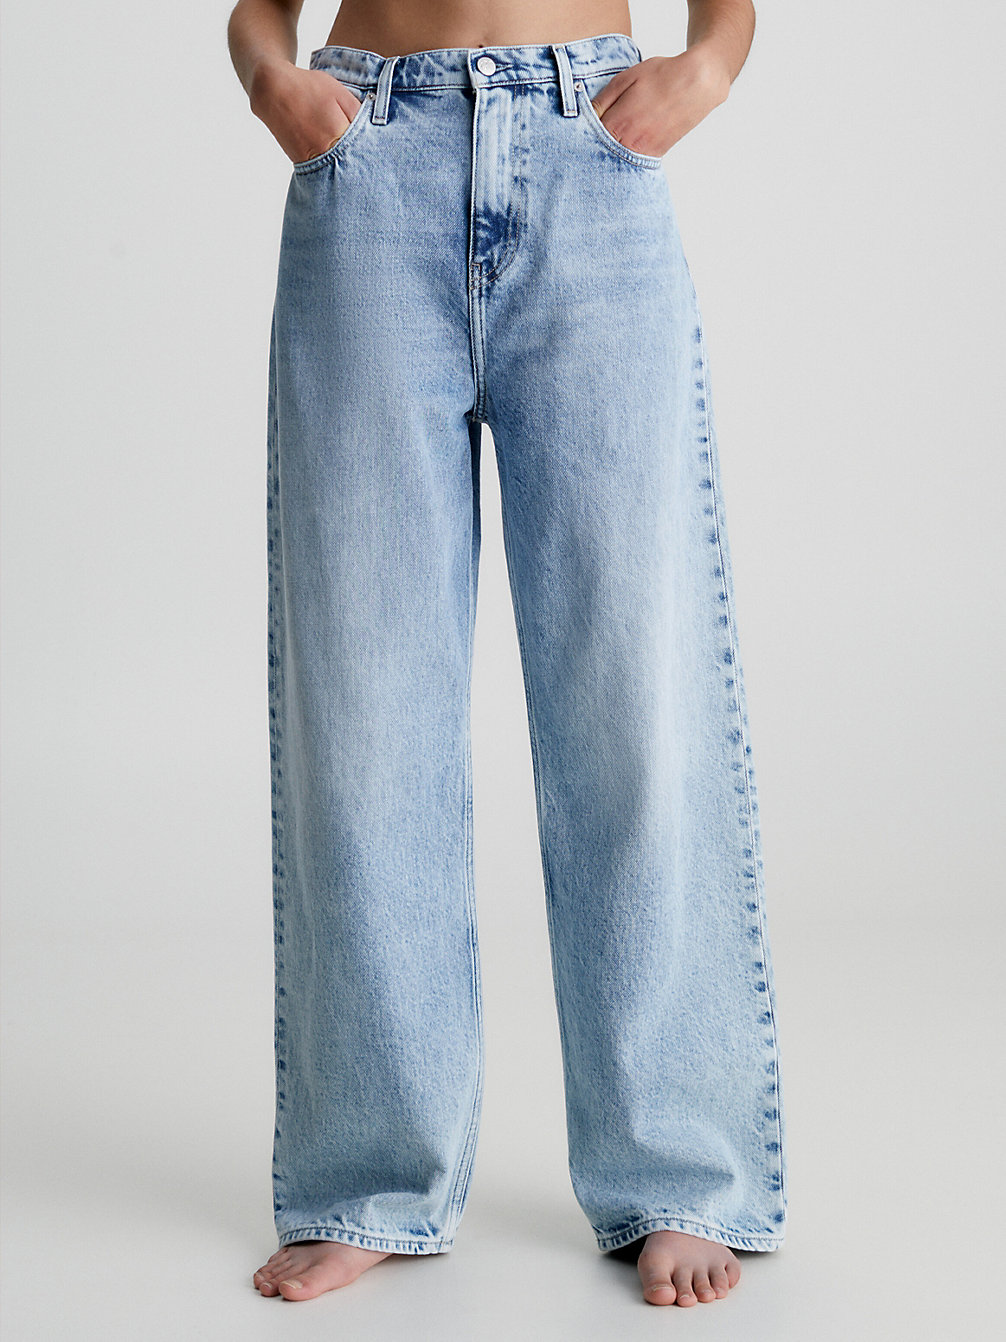 High Rise Relaxed Jeans > DENIM LIGHT > undefined mujer > Calvin Klein